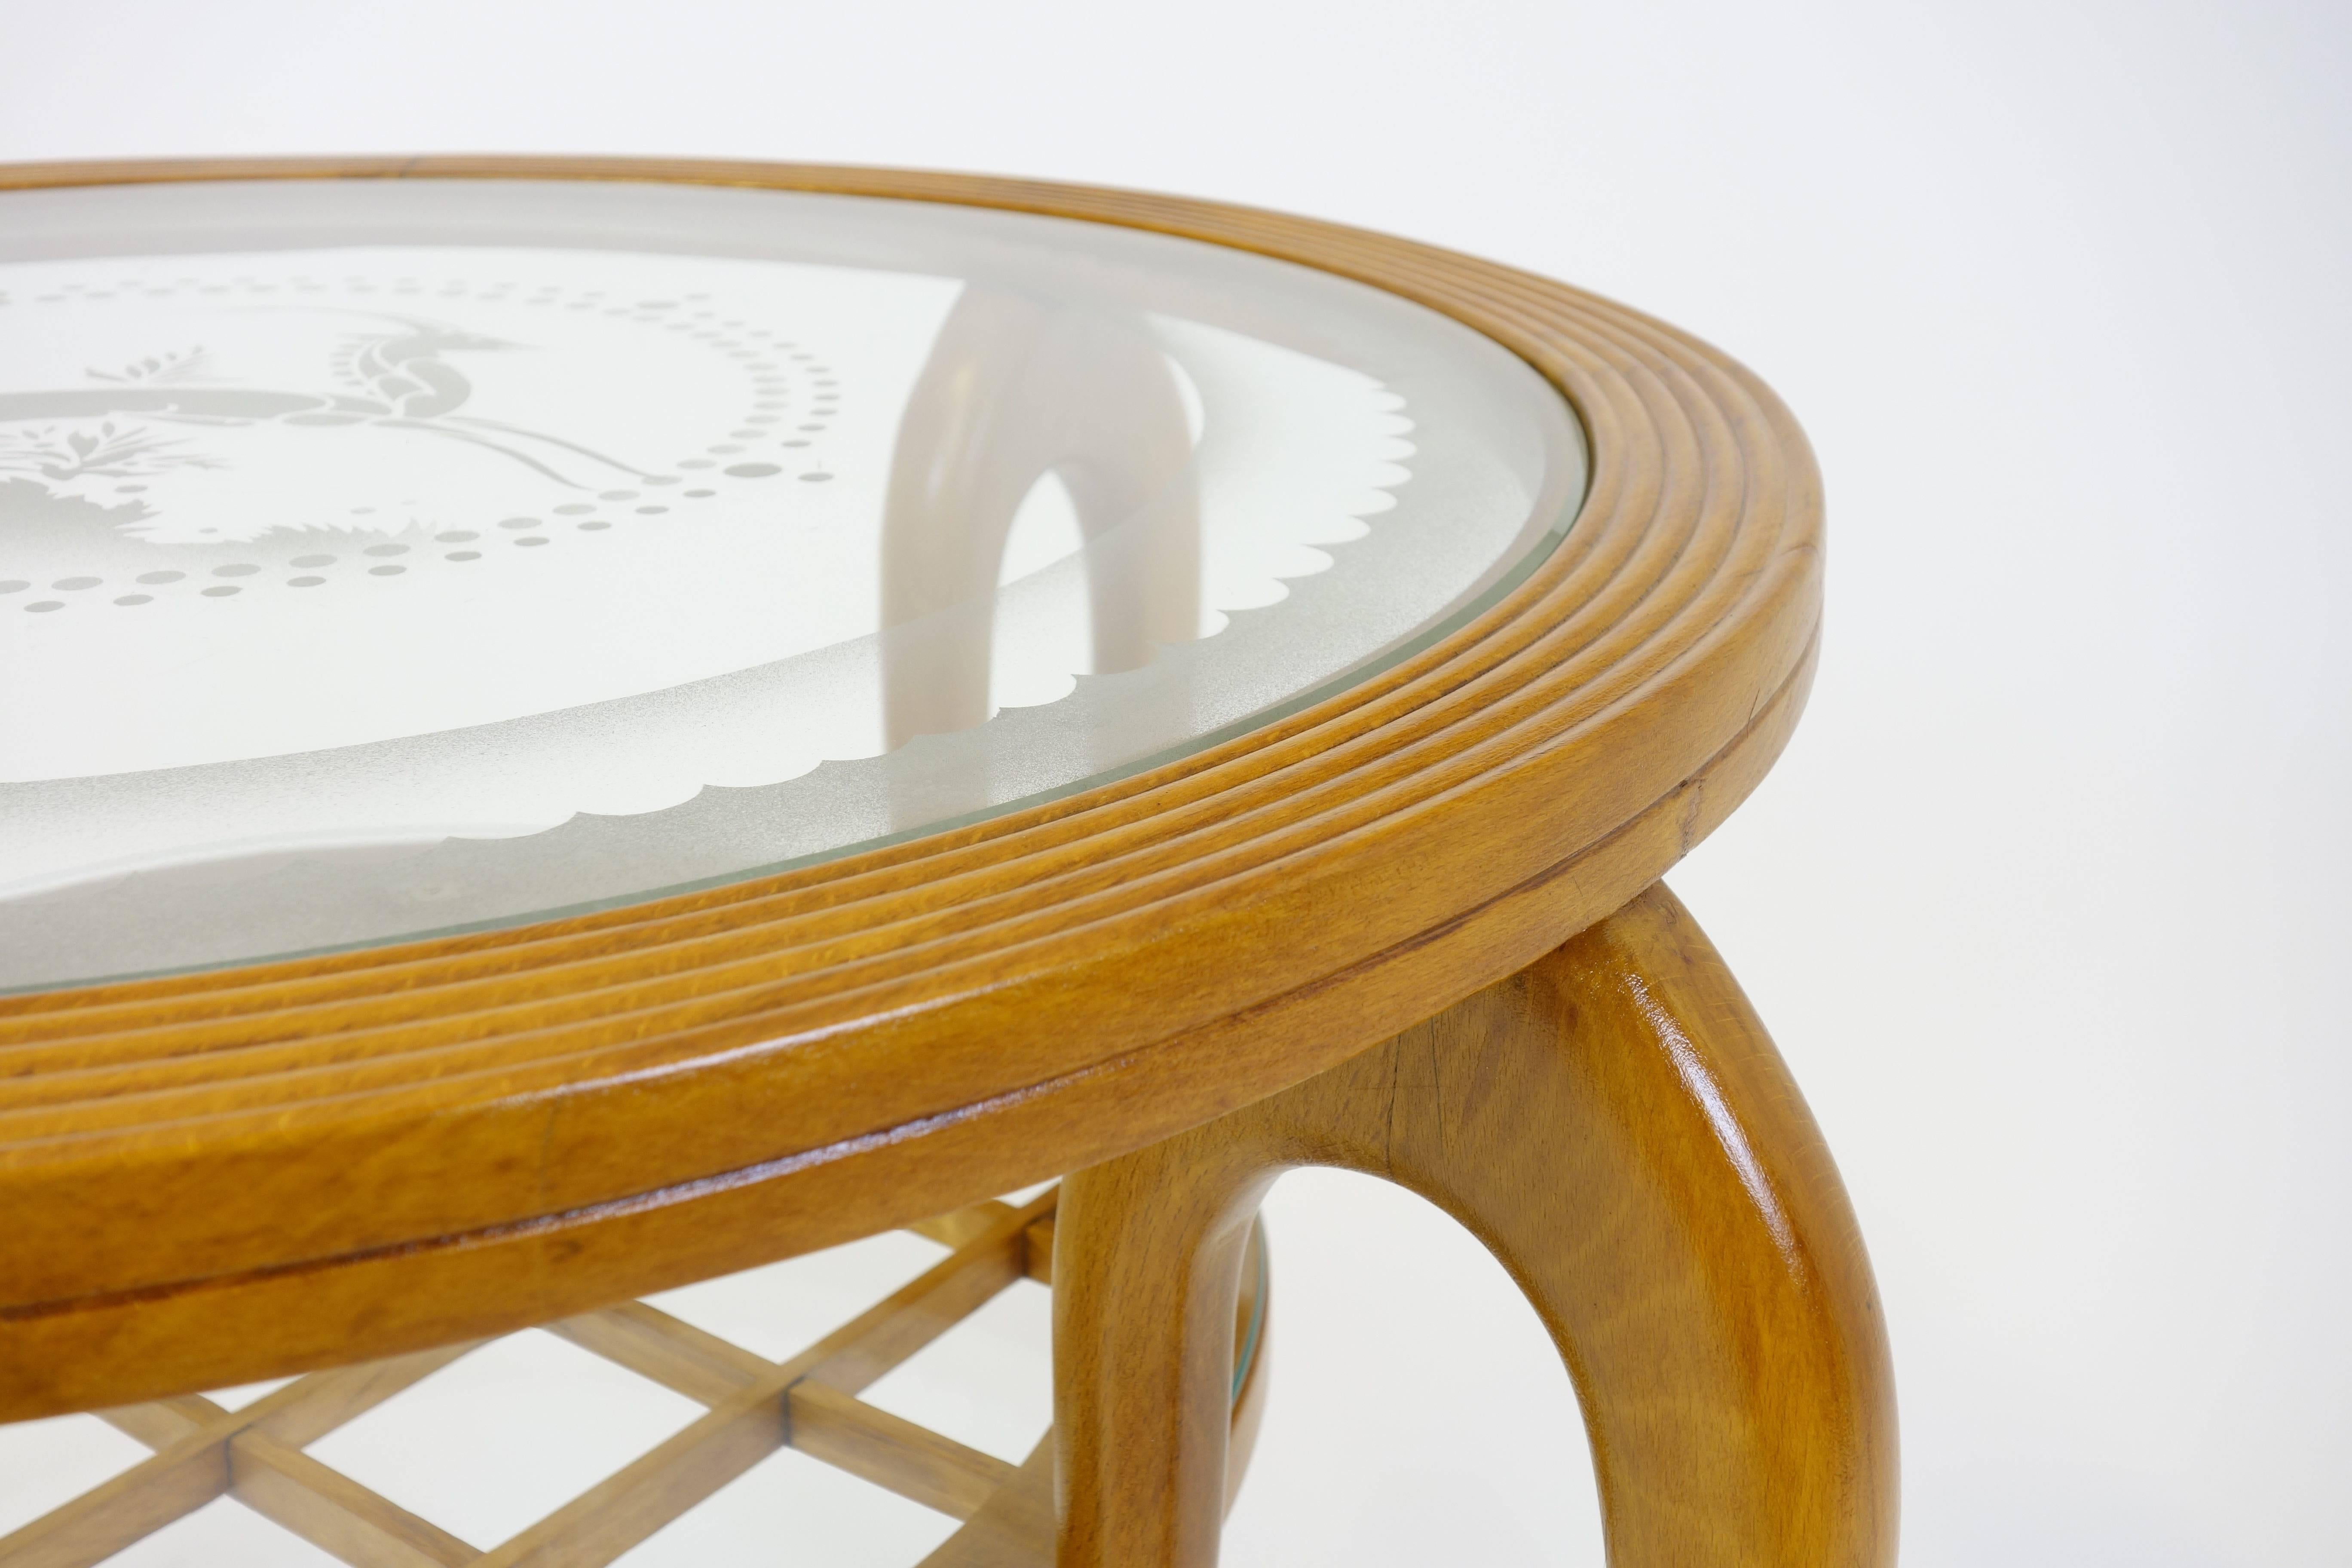 Side table attributed to Gio Ponti, Italy 1940. Material of the frame is made of pearwood carrying two glass tops. The larger glass top shows etchings with decorative patterns, a gazelle motif gives the most significant central expression. The